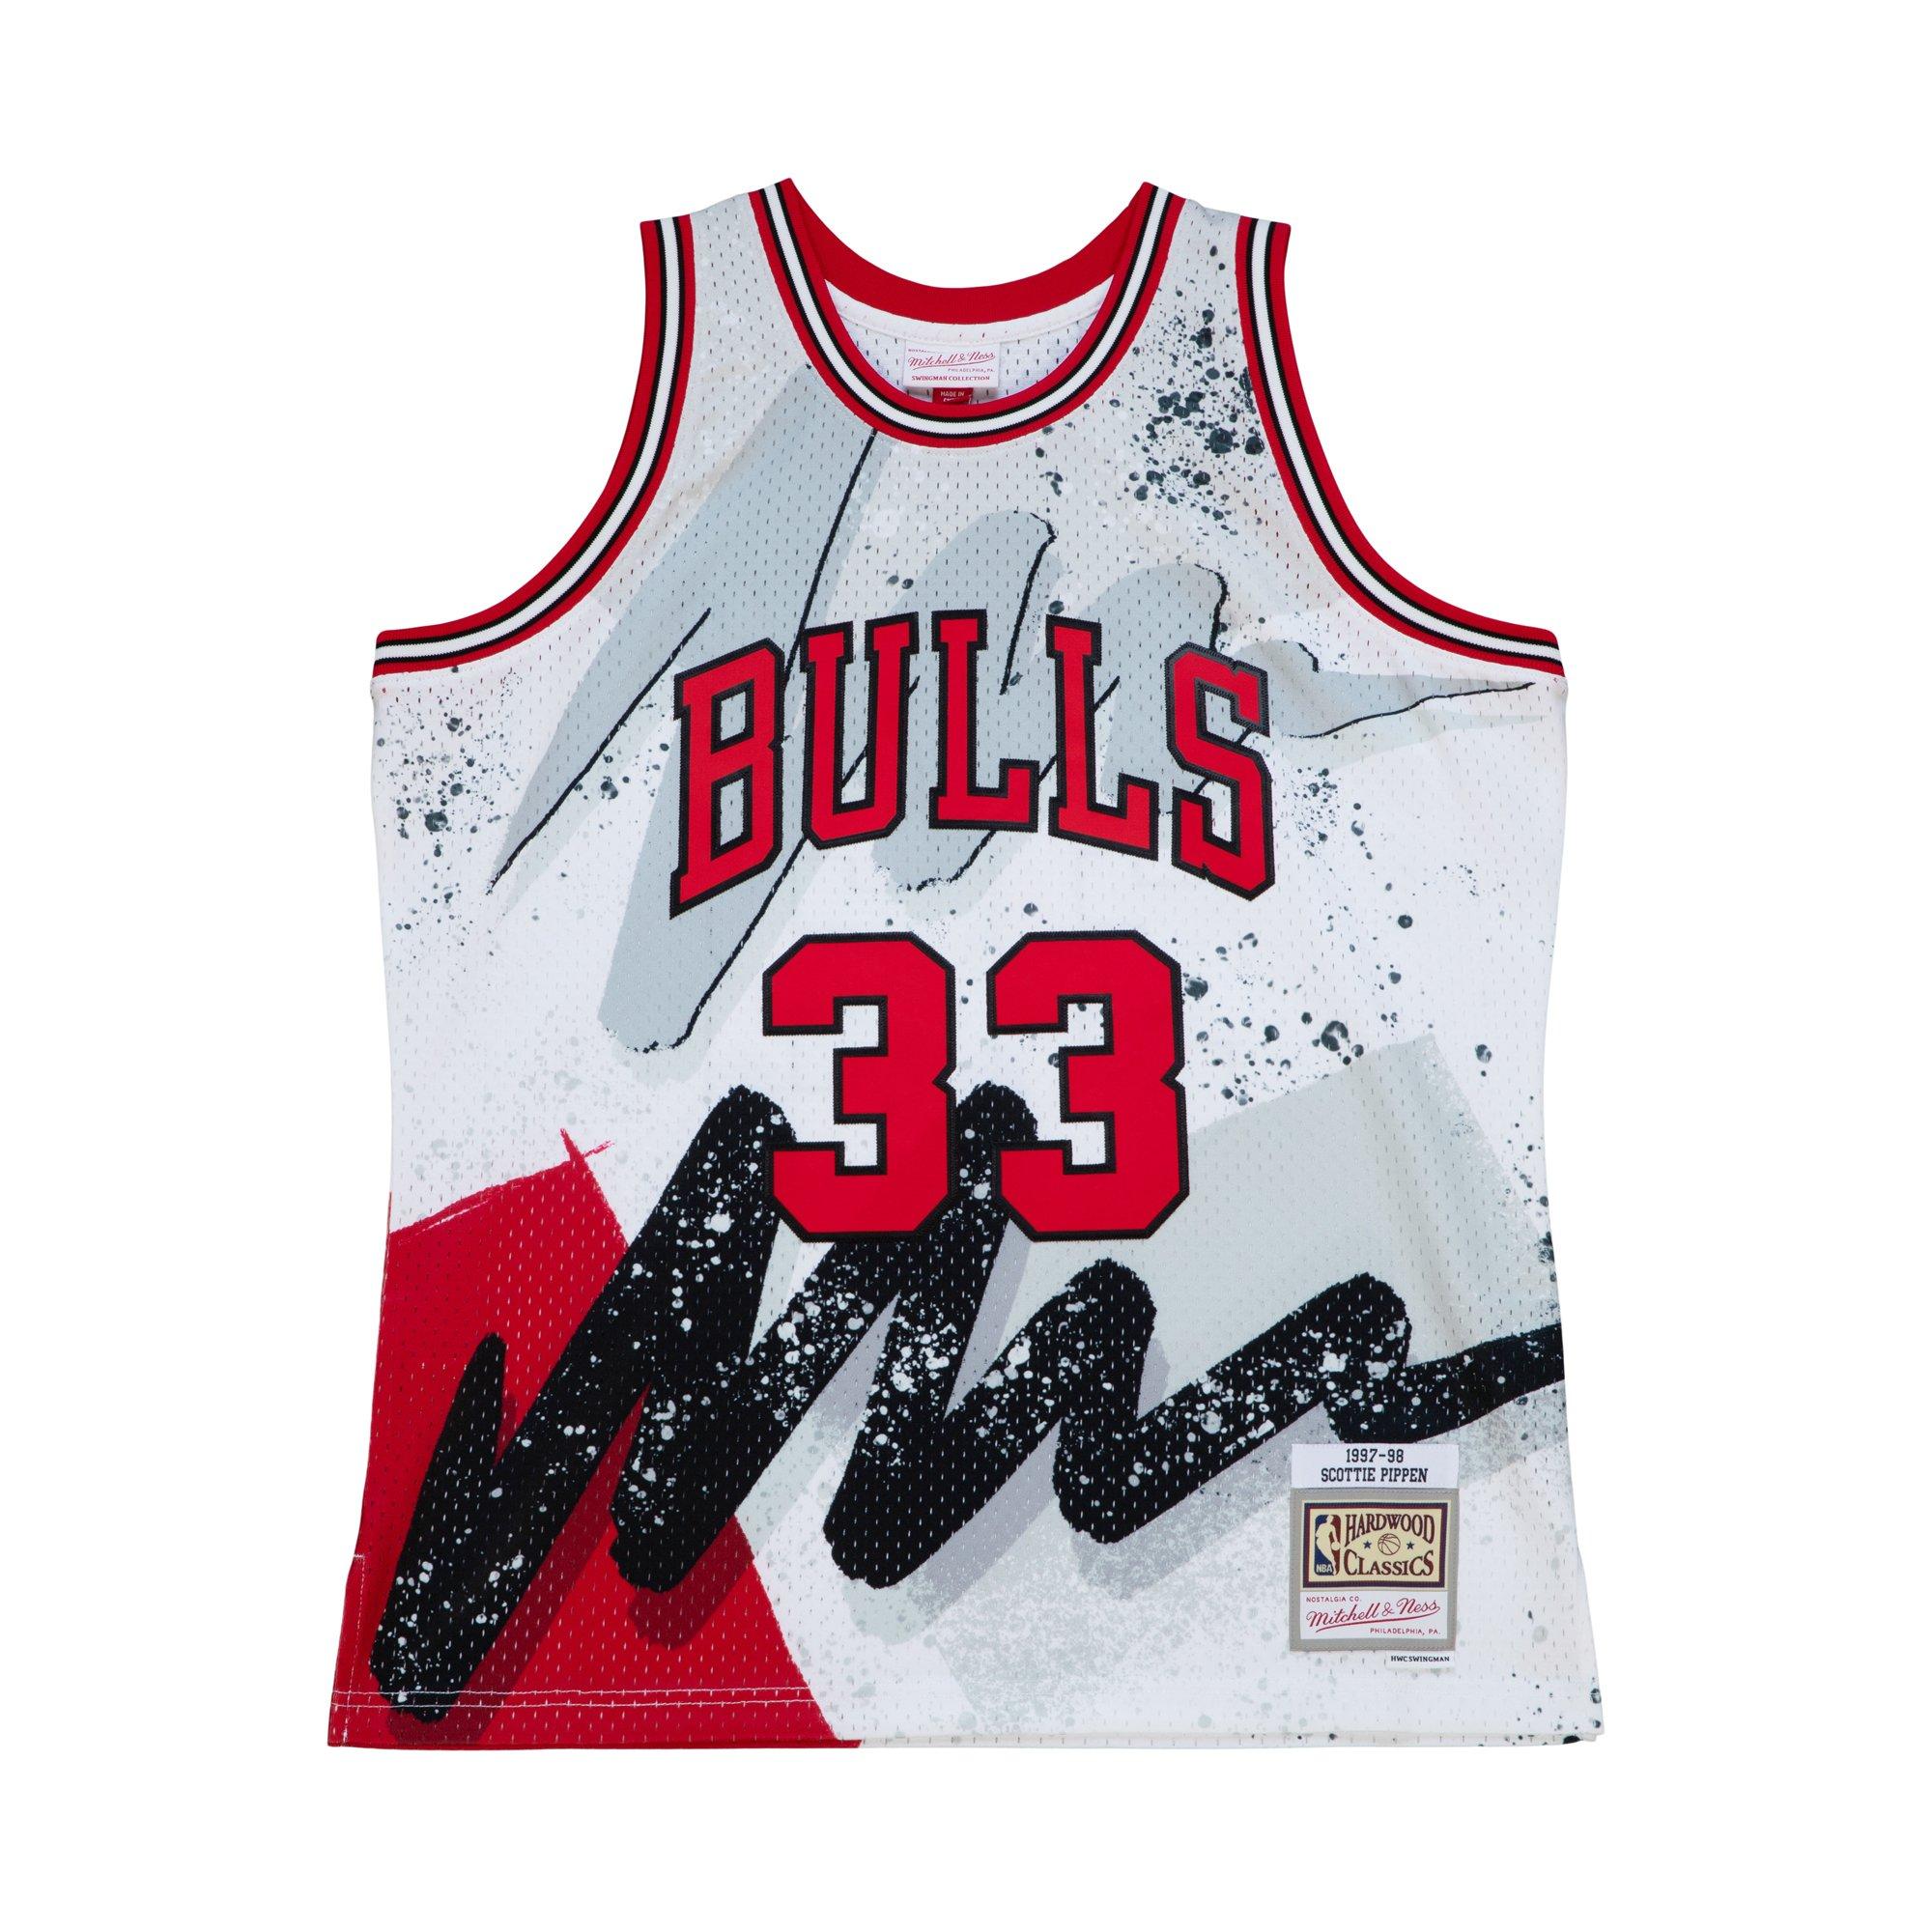 Mitchell & Ness unveils Pippen and Wallace throwback jerseys